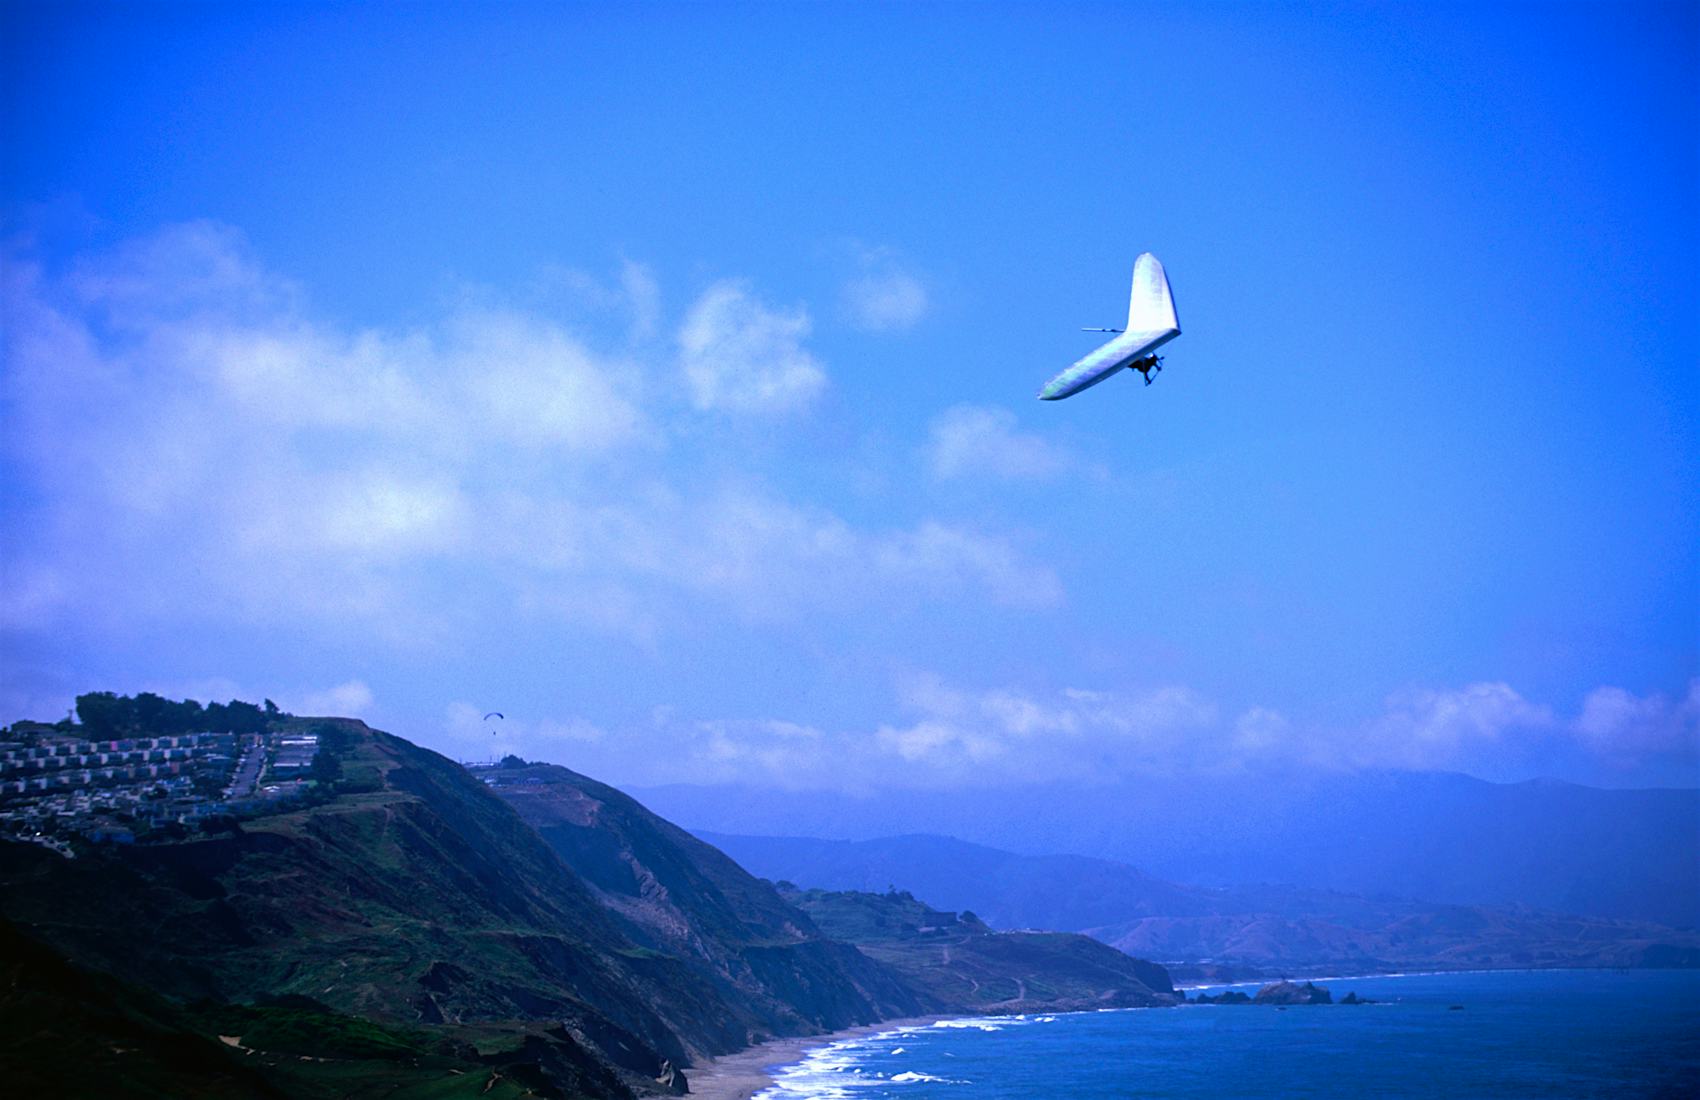 A hang glider swirls over the hills and waters of Fort Funston like a swallow.